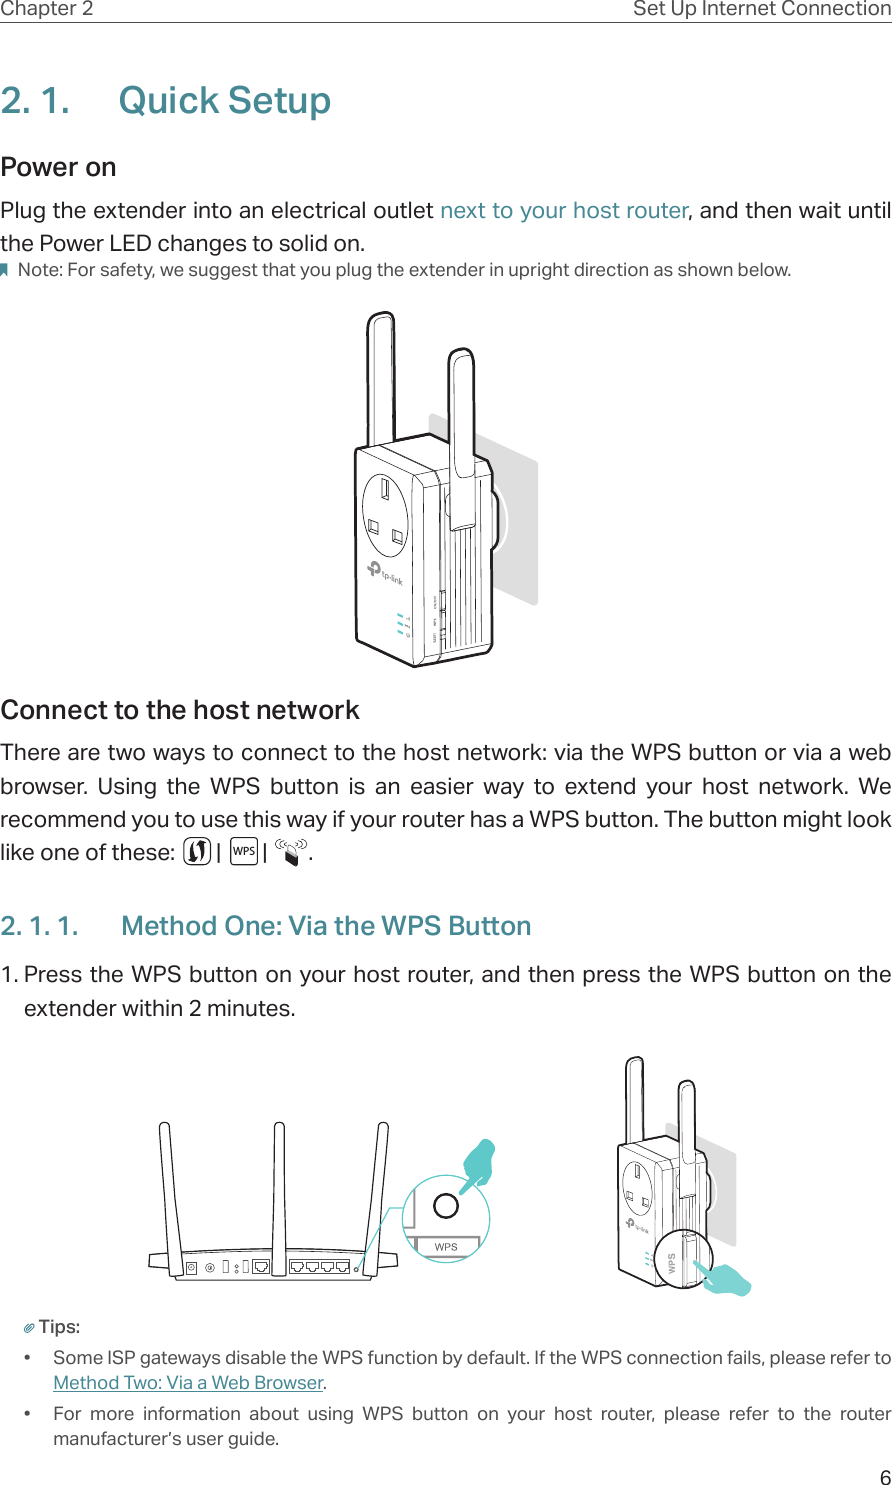 6Chapter 2 Set Up Internet Connection2. 1.  Quick SetupPower on Plug the extender into an electrical outlet next to your host router, and then wait until the Power LED changes to solid on. Note: For safety, we suggest that you plug the extender in upright direction as shown below.Connect to the host network There are two ways to connect to the host network: via the WPS button or via a web browser. Using the WPS button is an easier way to extend your host network. We recommend you to use this way if your router has a WPS button. The button might look like one of these:        |        |        .2. 1. 1.  Method One: Via the WPS Button1. Press the WPS button on your host router, and then press the WPS button on the extender within 2 minutes.Tips:•  Some ISP gateways disable the WPS function by default. If the WPS connection fails, please refer to Method Two: Via a Web Browser.•  For more information about using WPS button on your host router, please refer to the router manufacturer’s user guide.WPS